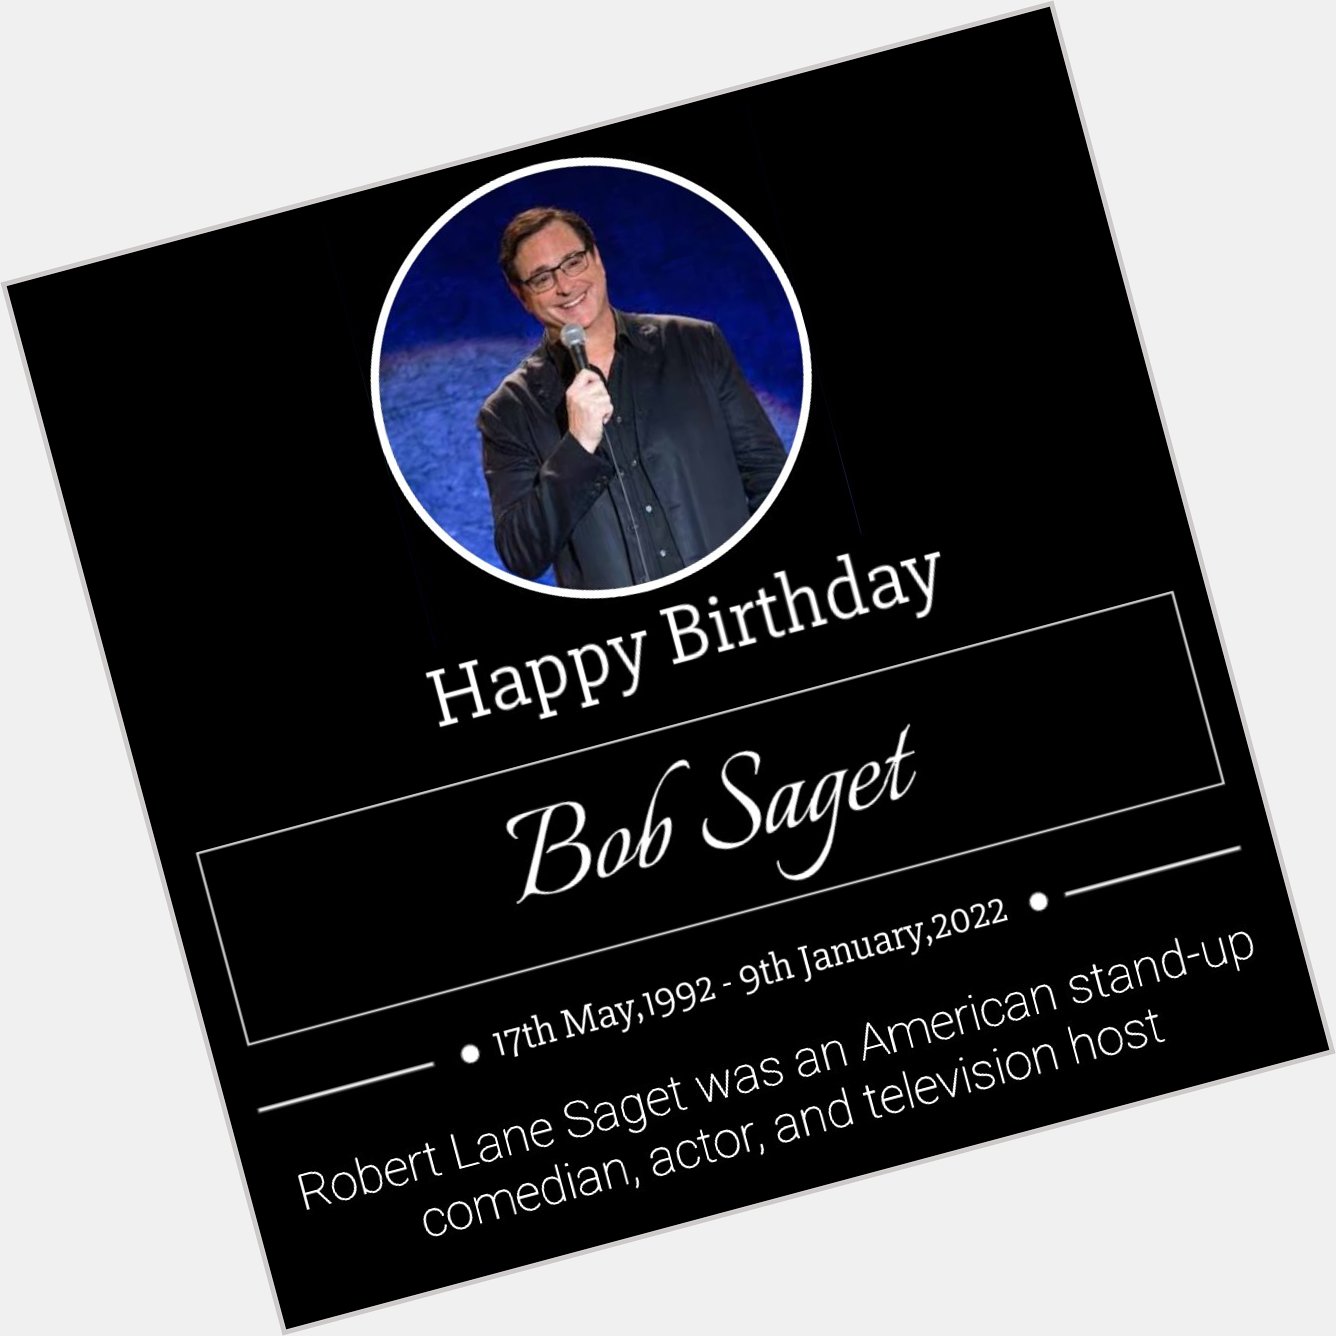 Happy Heavenly 66th Birthday Bob Saget. Rest in peace where you are. 